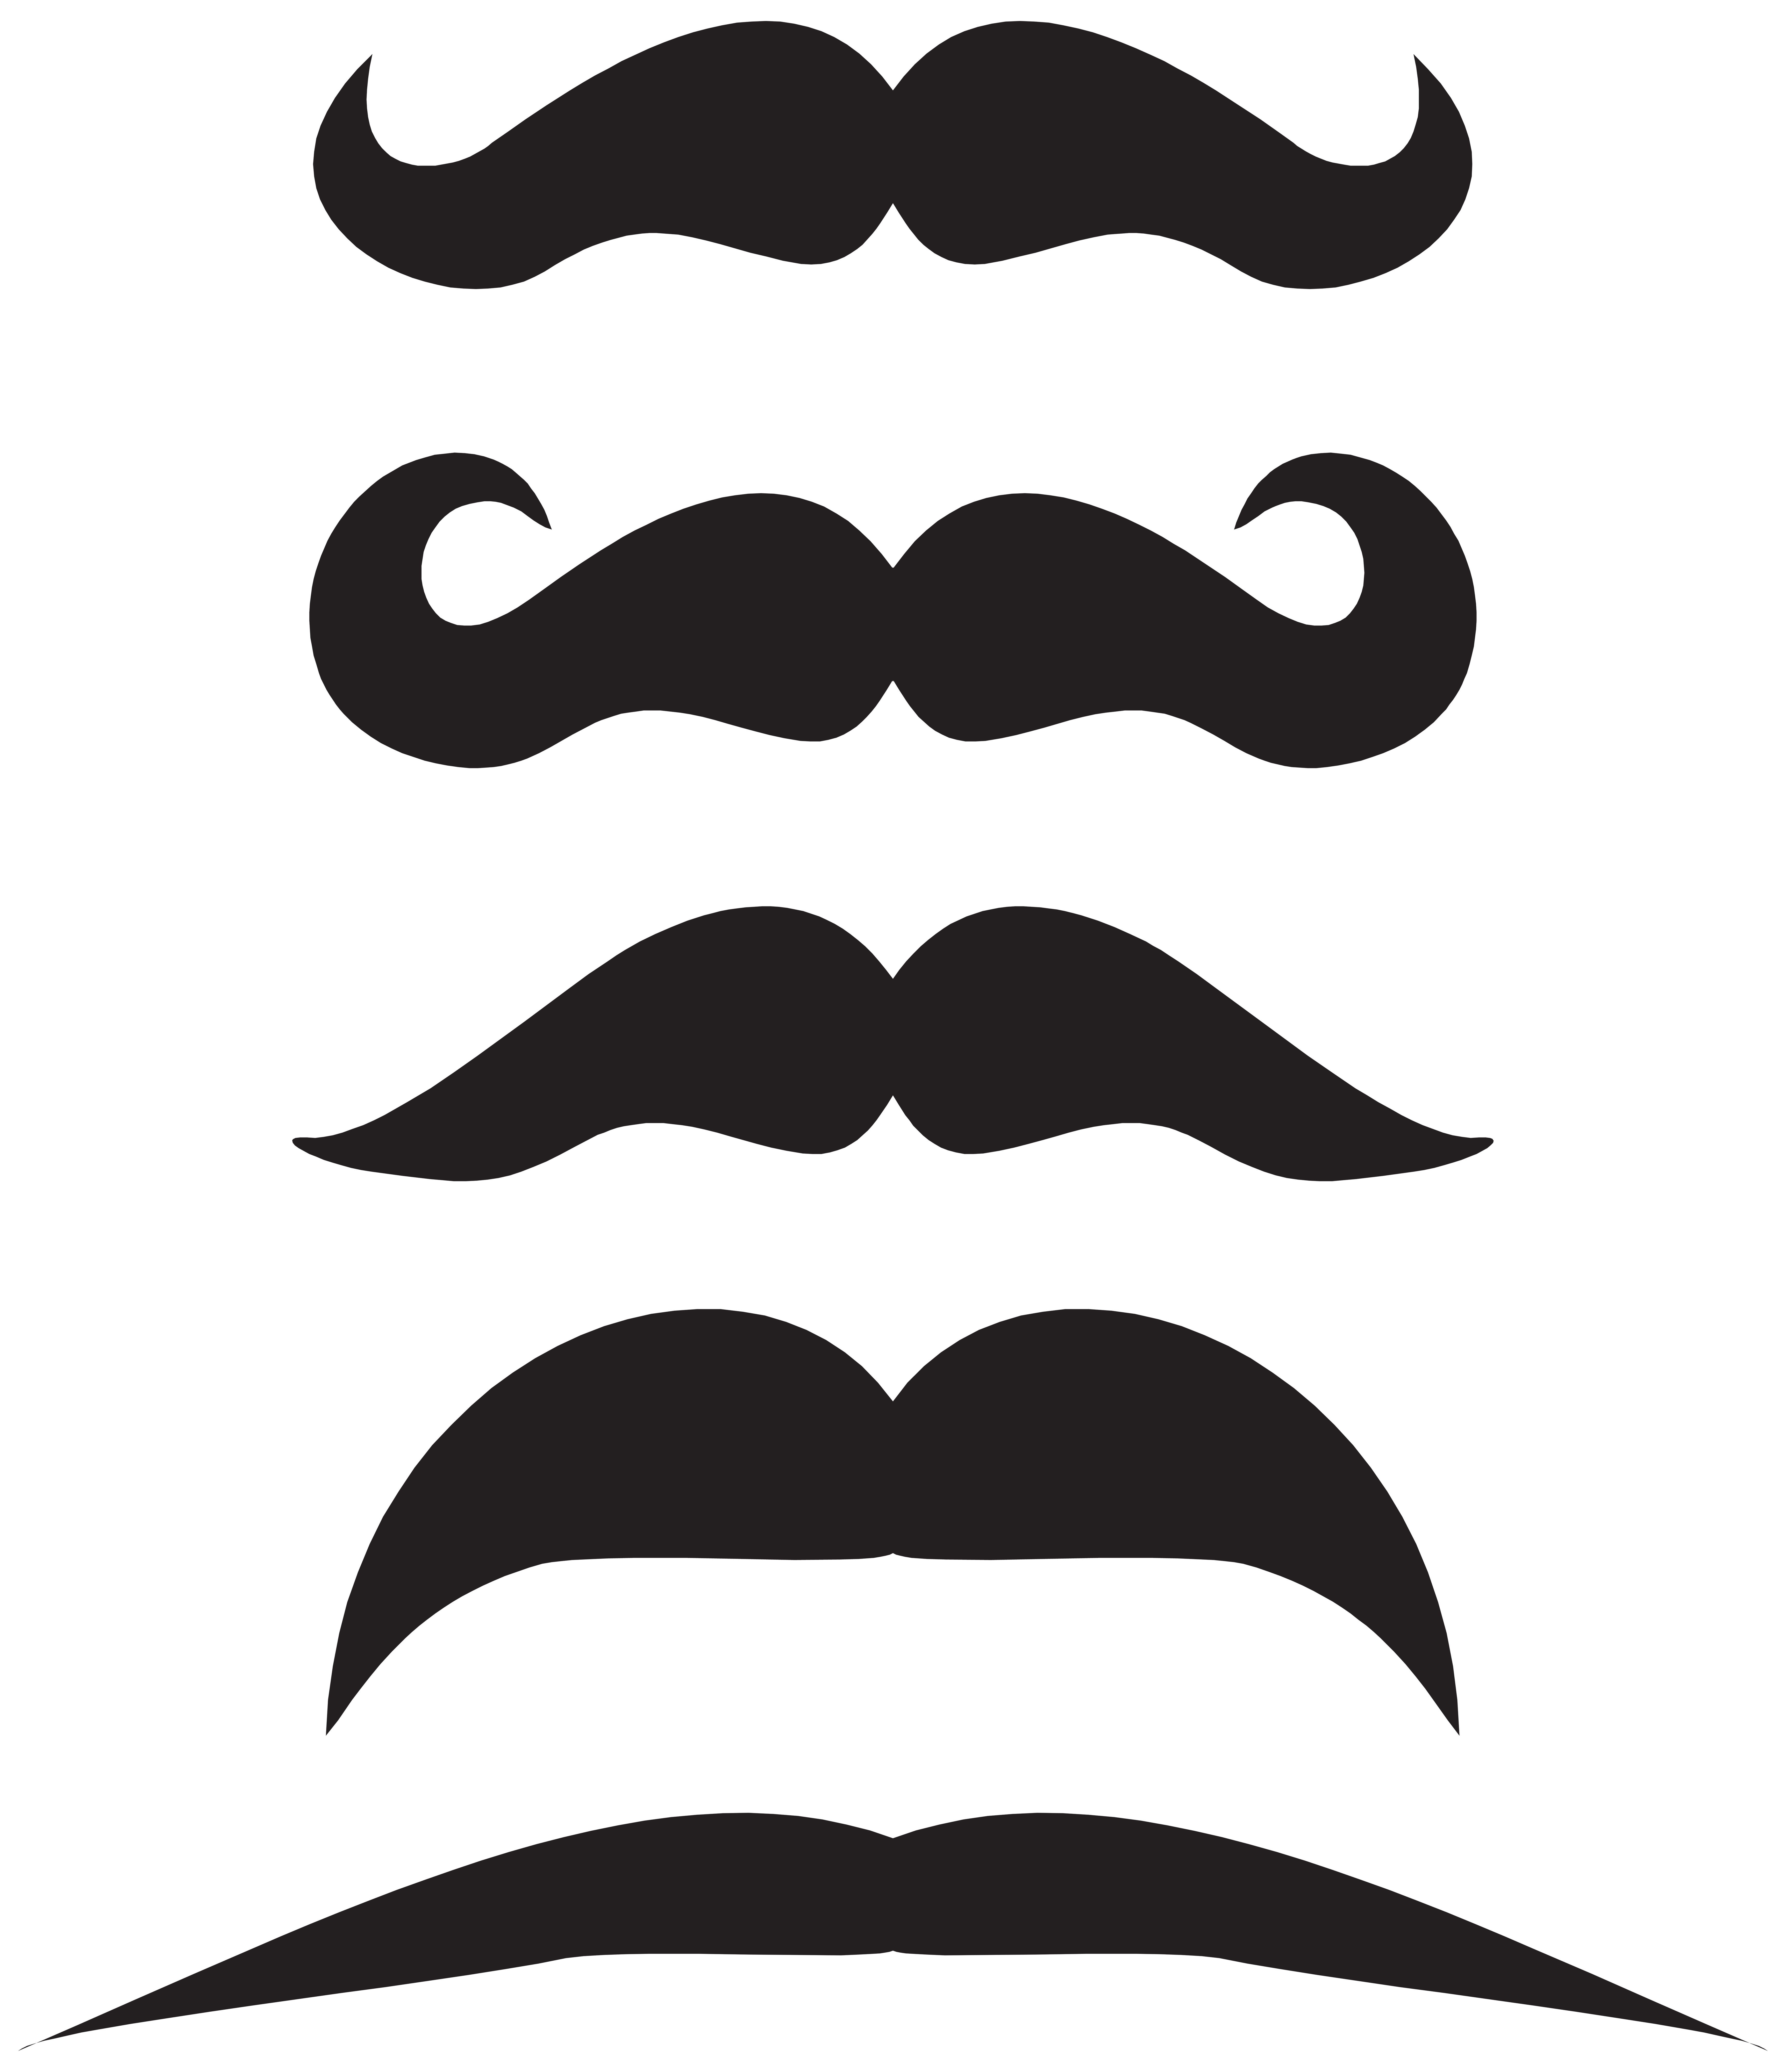 mustache clipart black thing